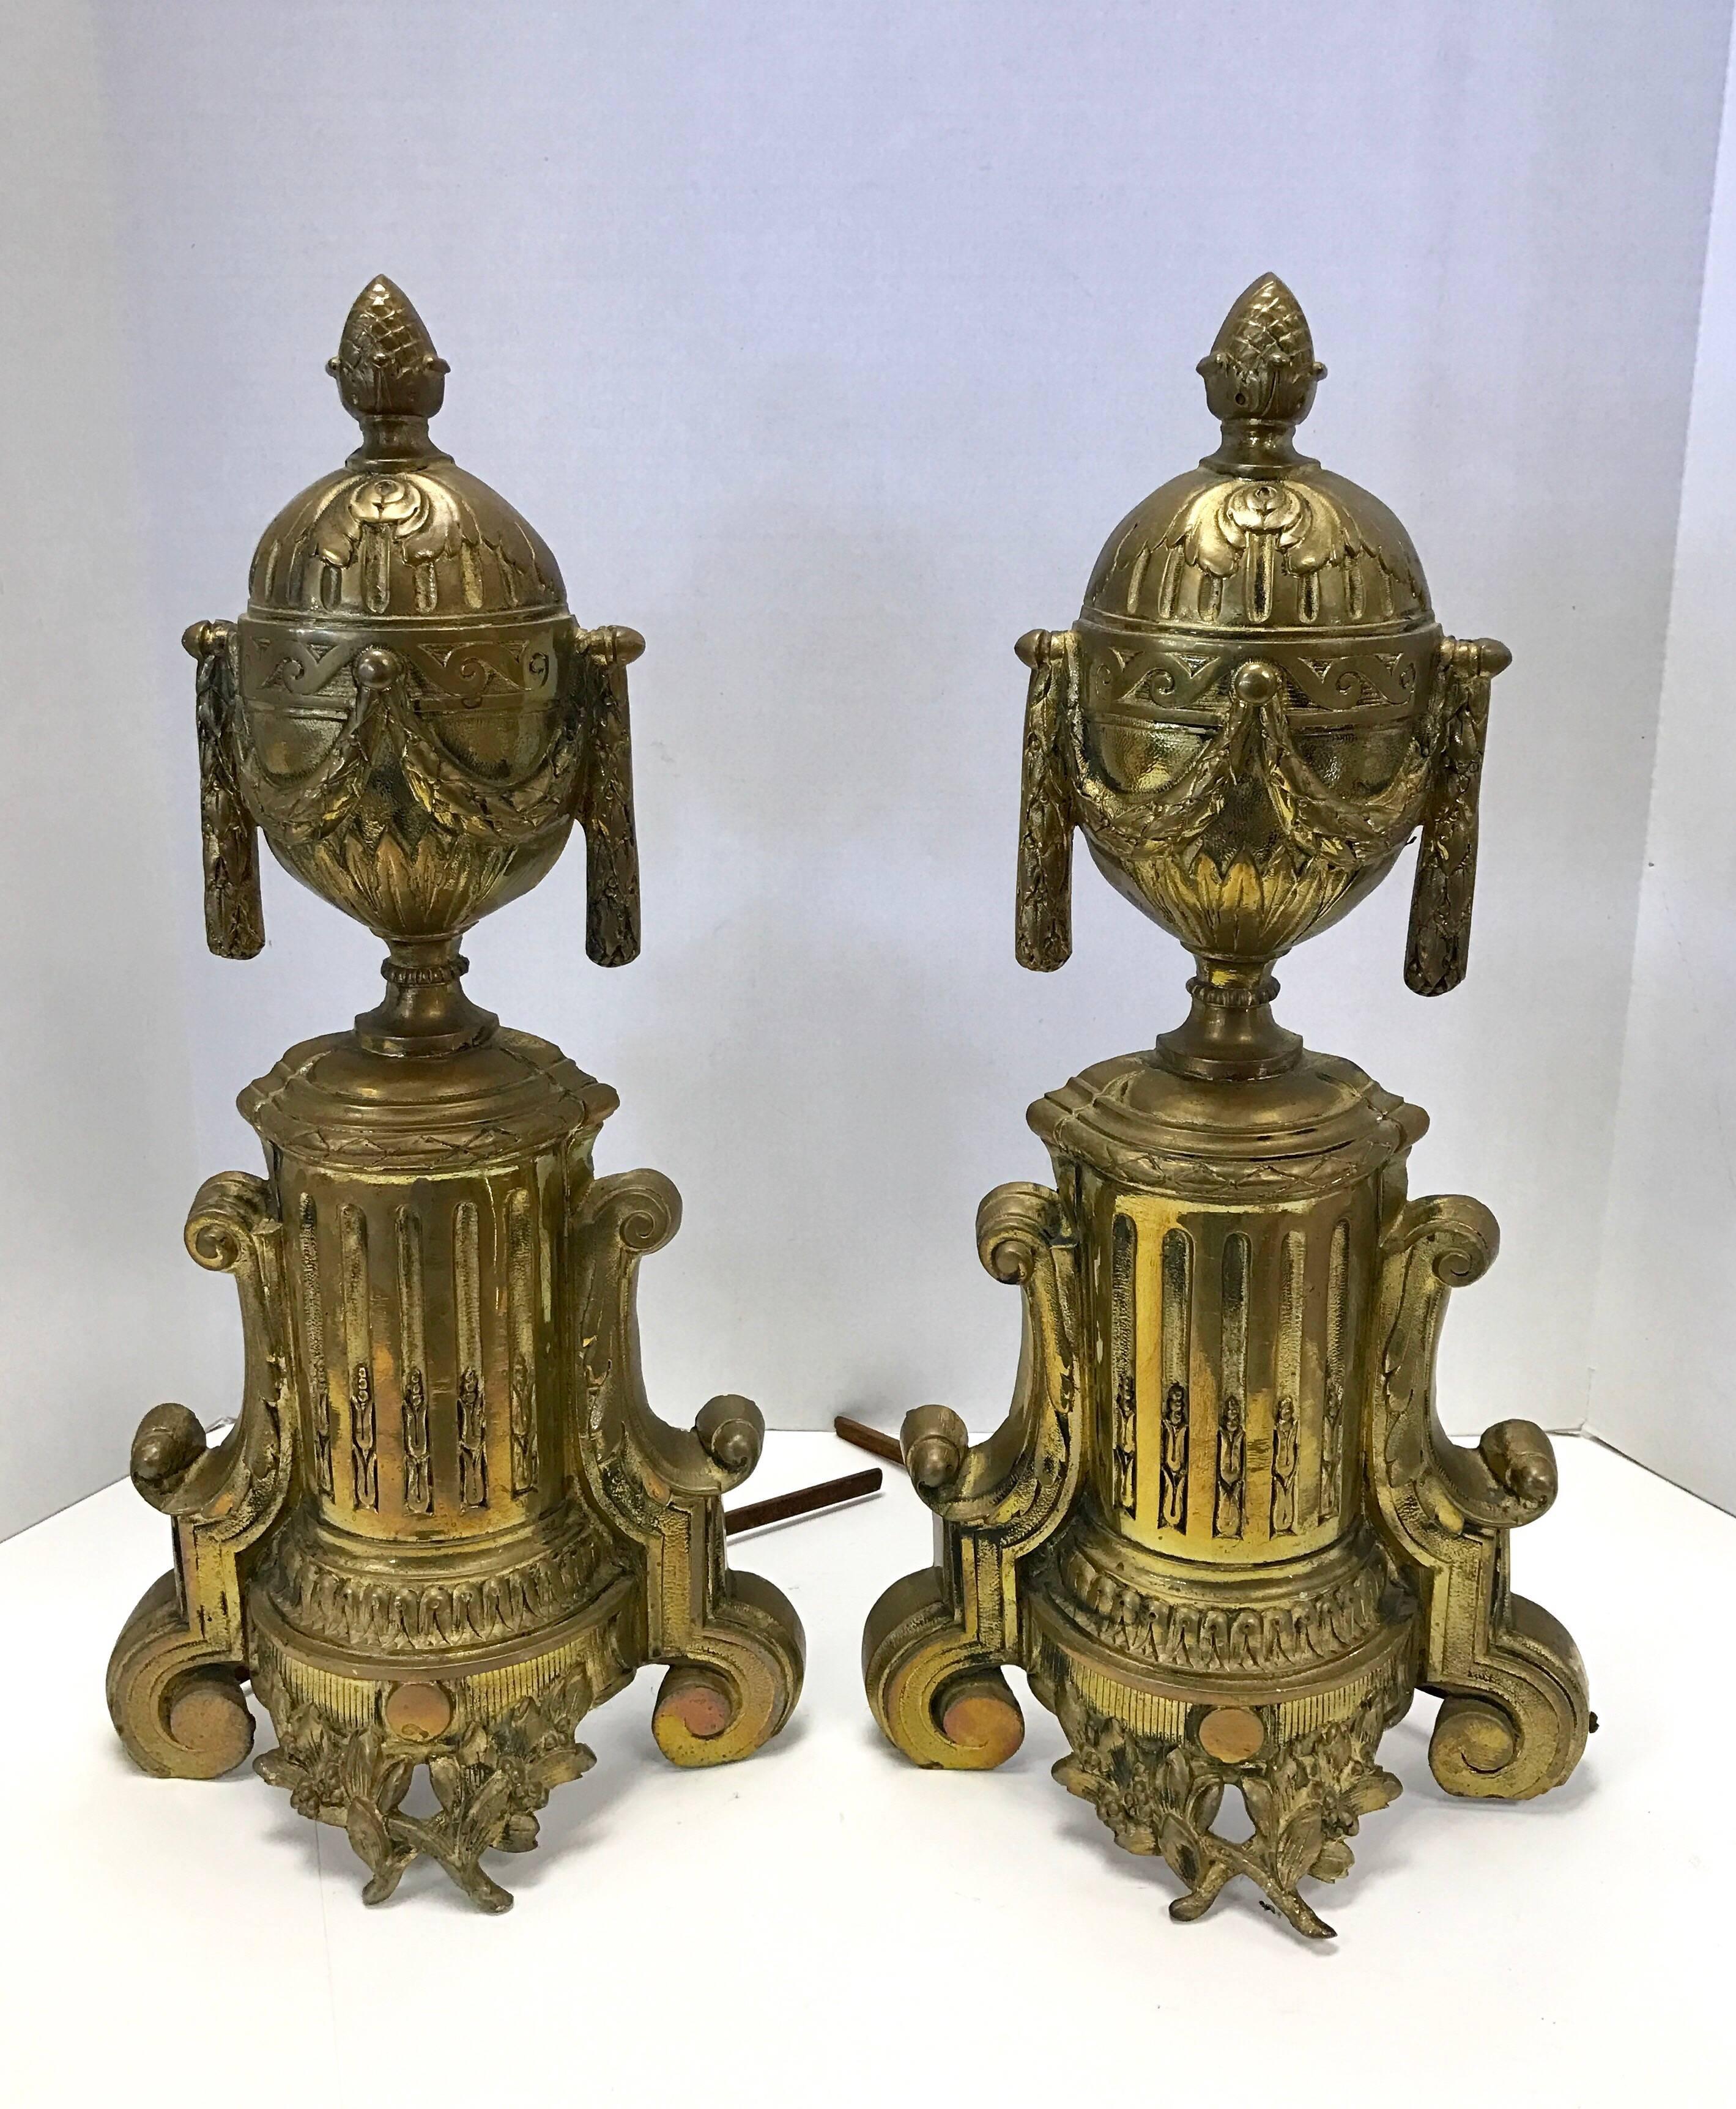 A pair of French cast brass chenets with draped urn detail on column supports. Includes matching fender.
Fender dimensions are 36 inches long by 6 inches tall; dimensions for andirons are below.